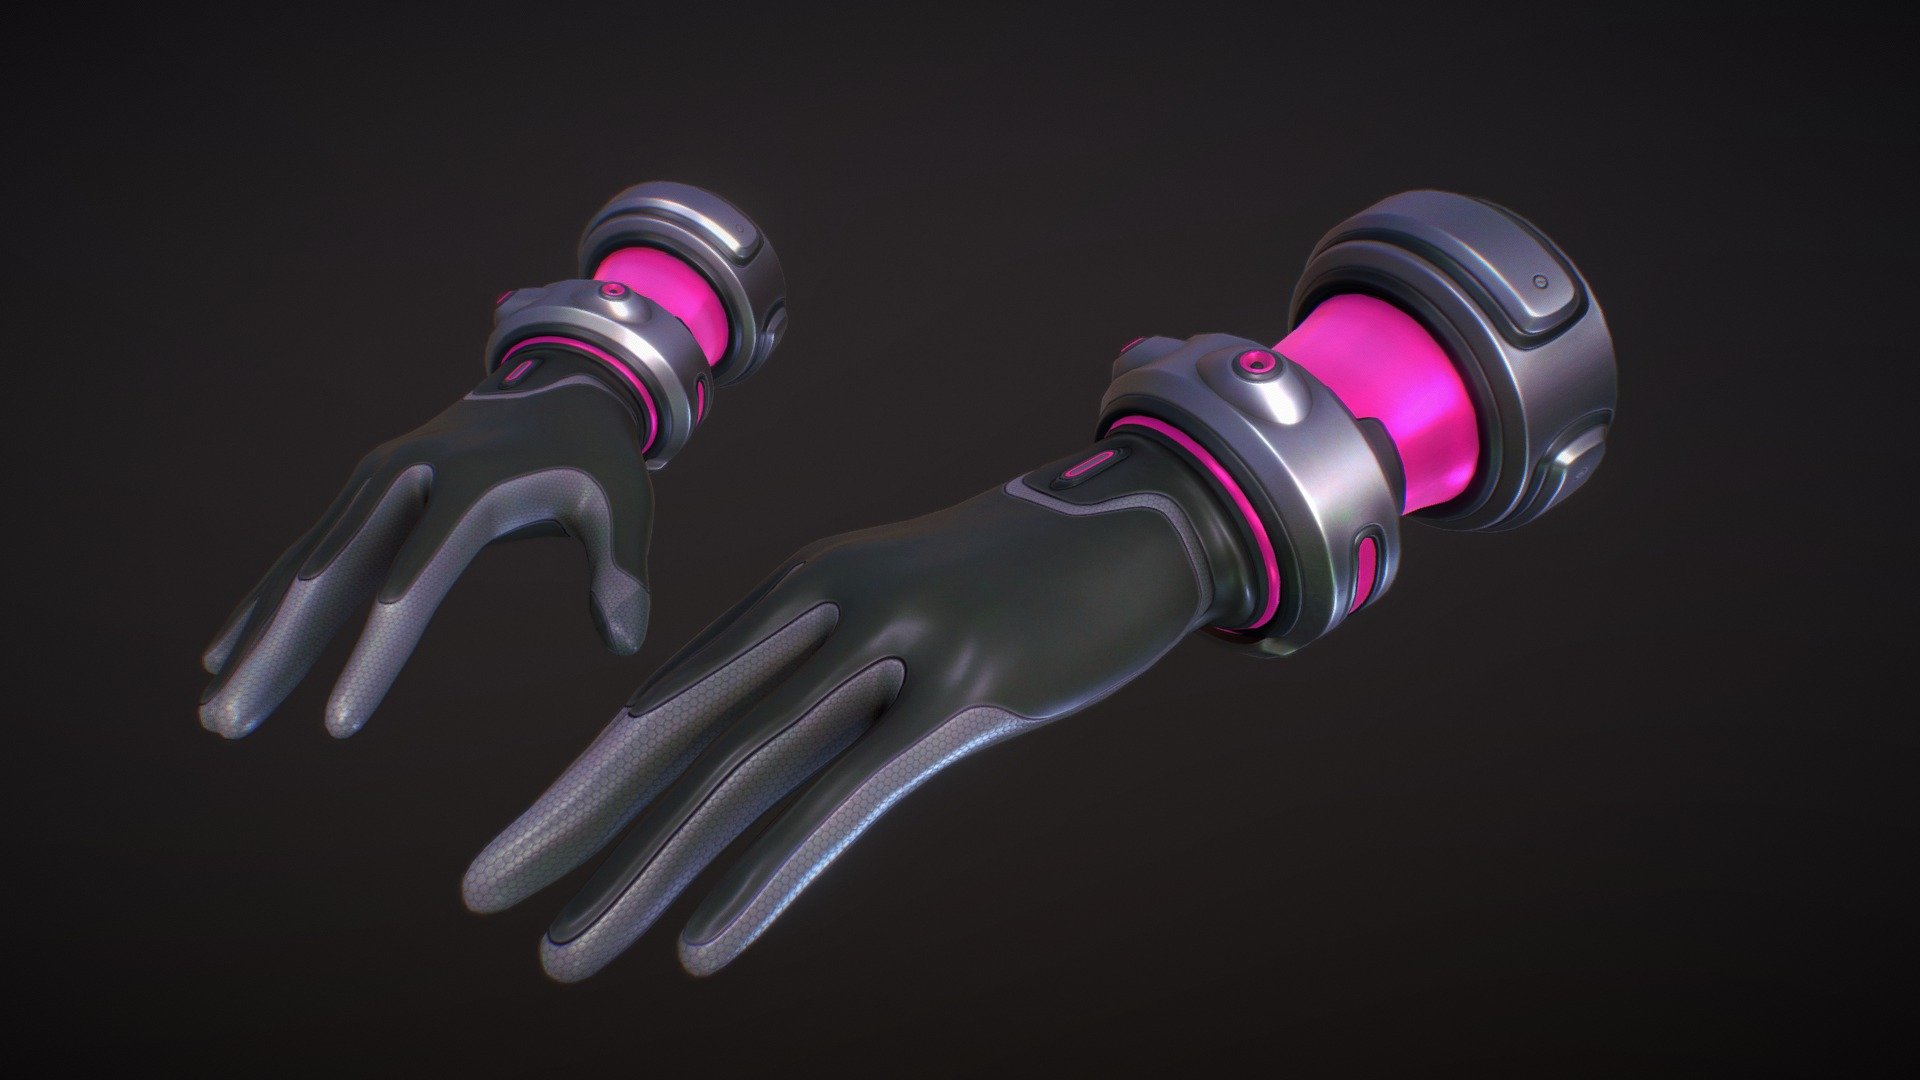 Hands for dancing sci-fi vr game
More pictures are here:
https://www.artstation.com/artwork/0XDzW5 - Hands - 3D model by Teliri 3d model